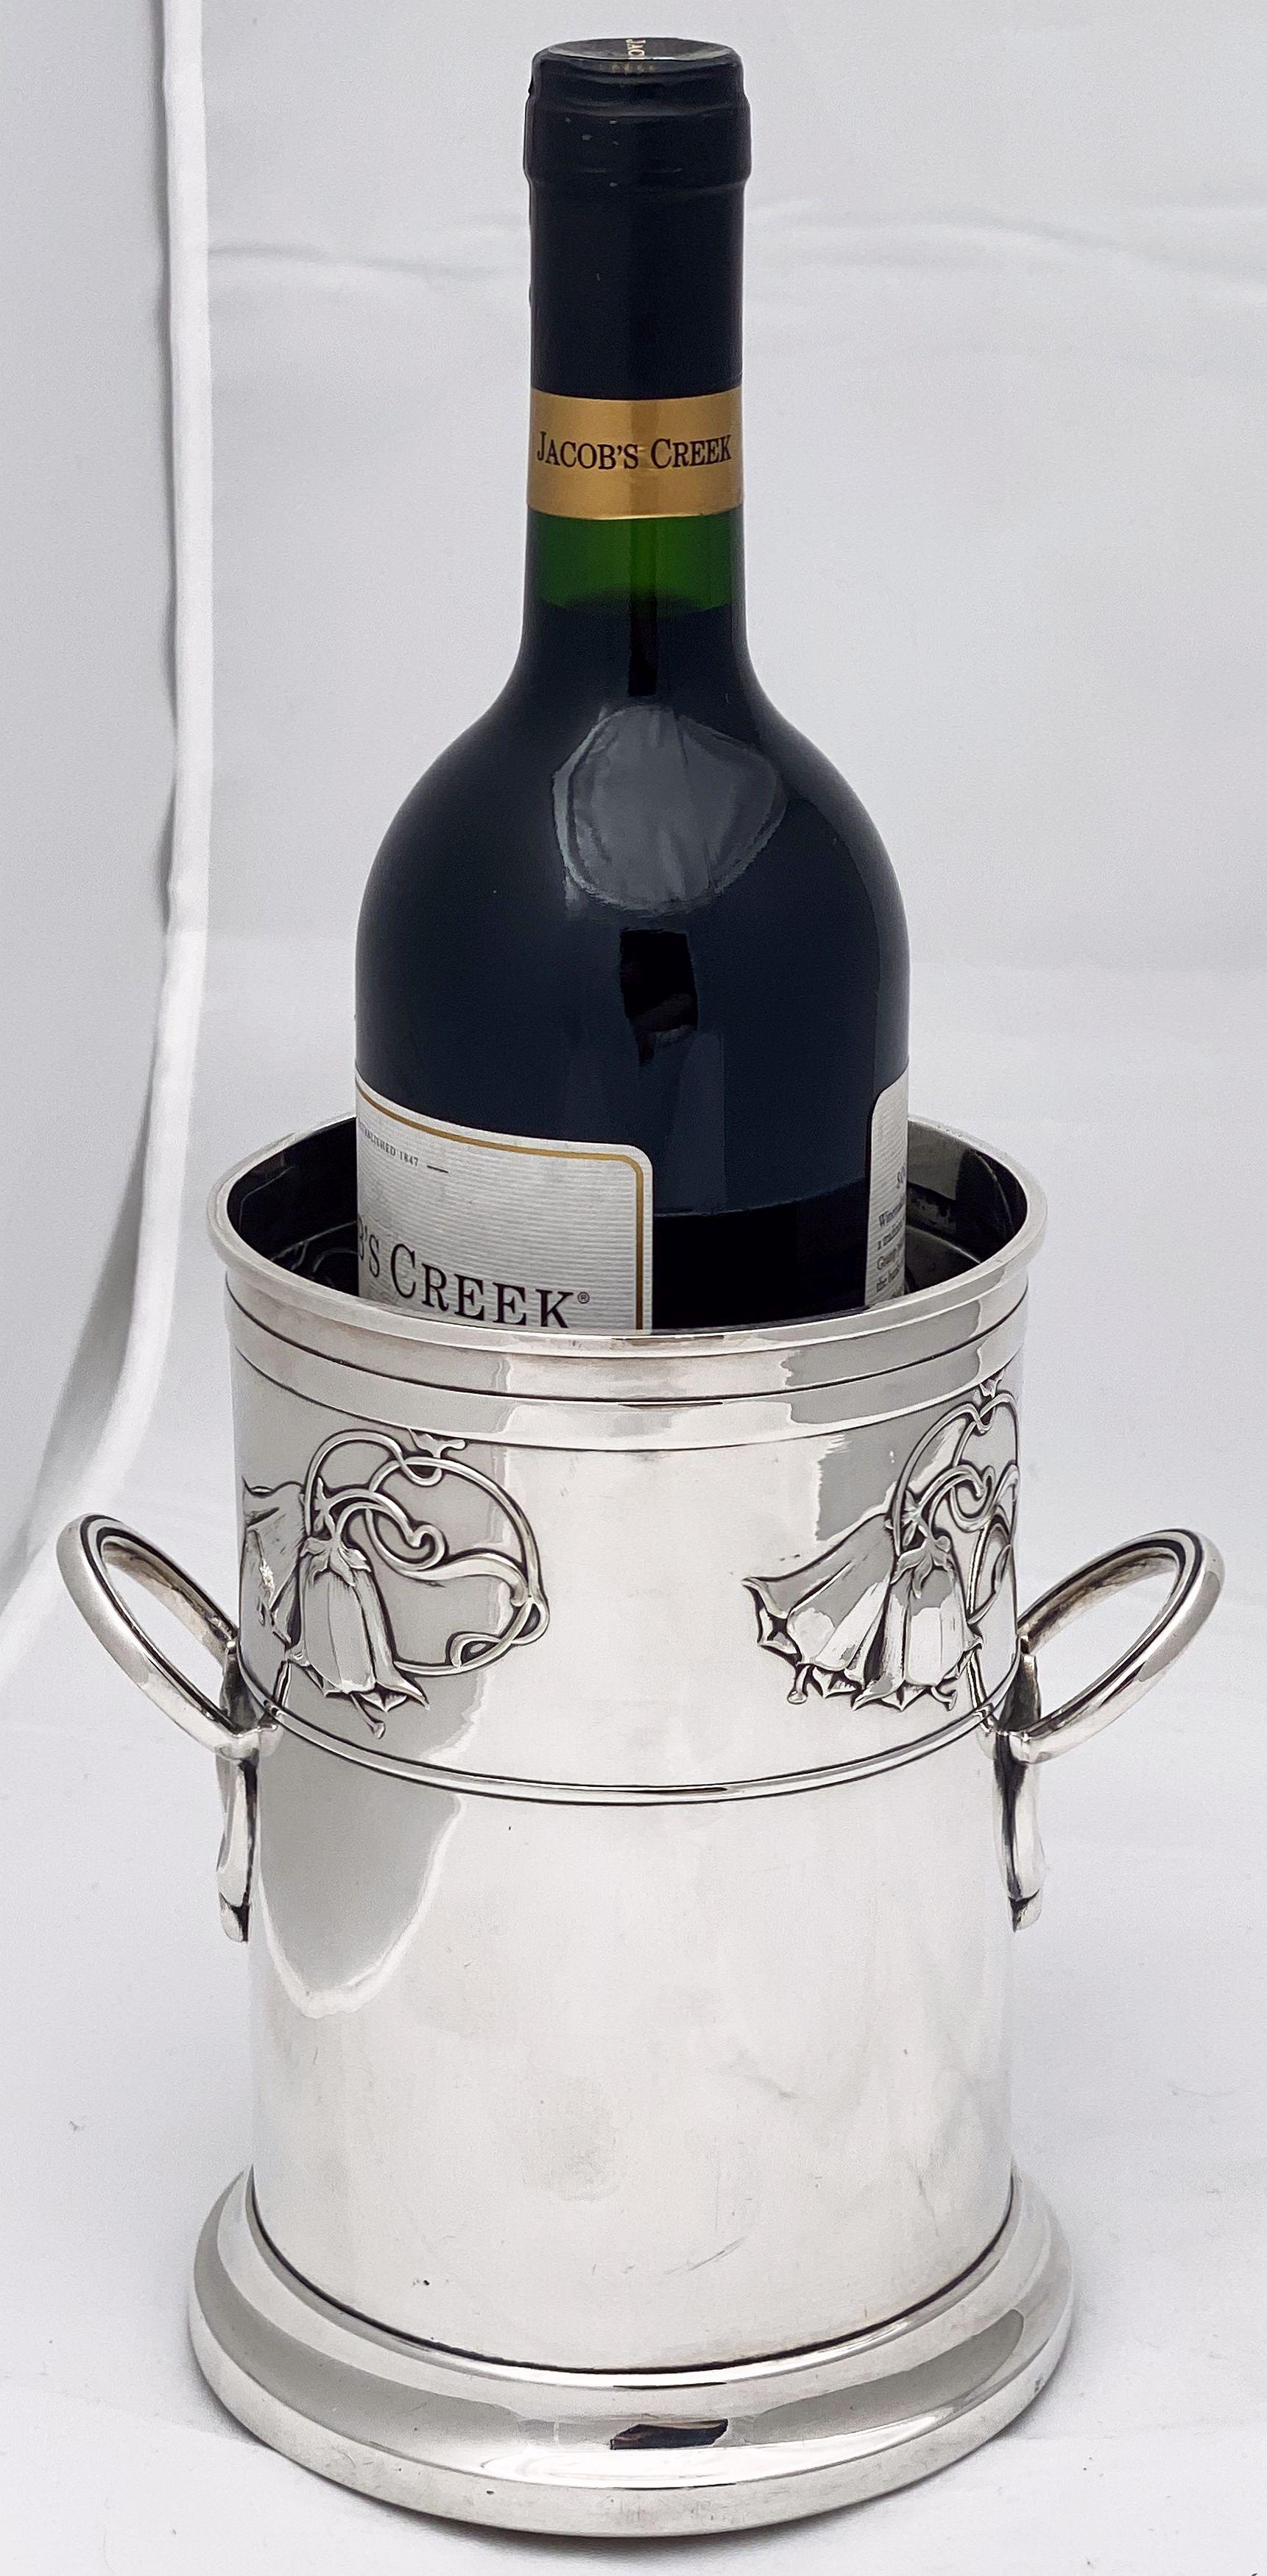 A handsome English wine and champagne bottle display holder or coaster of fine plate silver, featuring a rolled top edge, stylish opposing handles, an embossed Art Nouveau design of flowers, and raised cylindrical base with wood and felt underside.